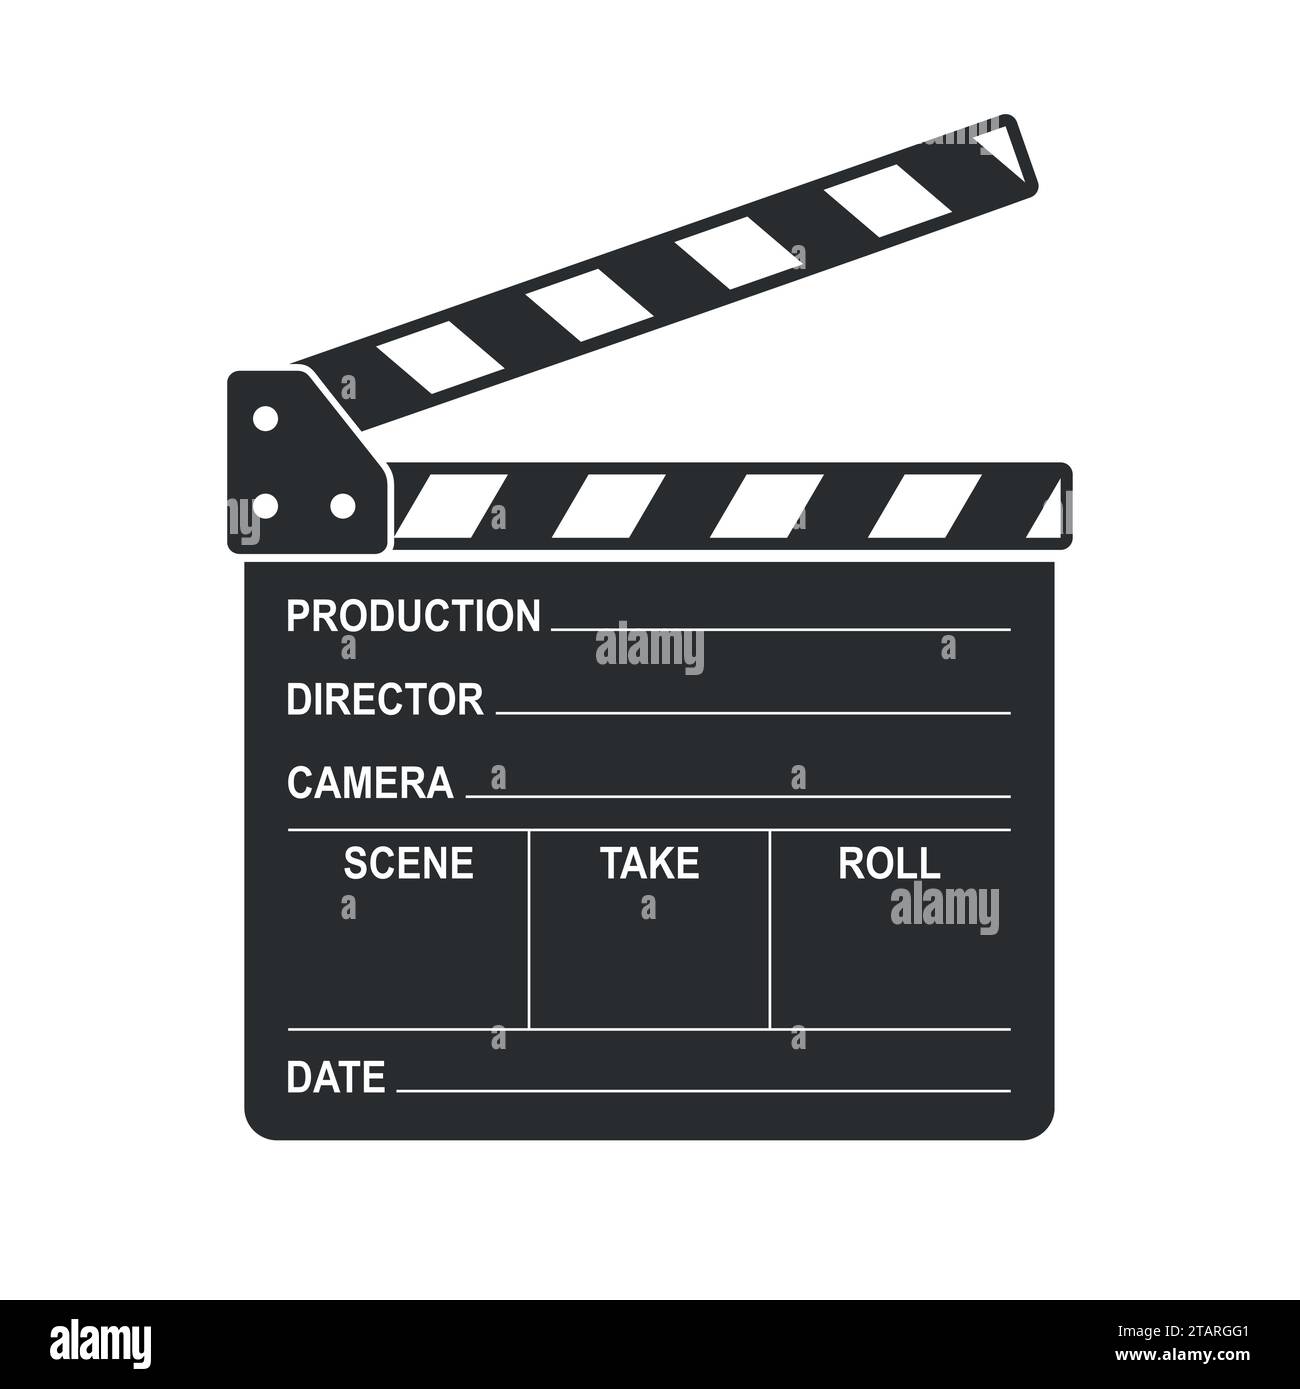 35mm Cinema Big Reel with Film and Movie Clapperboard Stock Photo - Image  of reel, clapper: 58356682